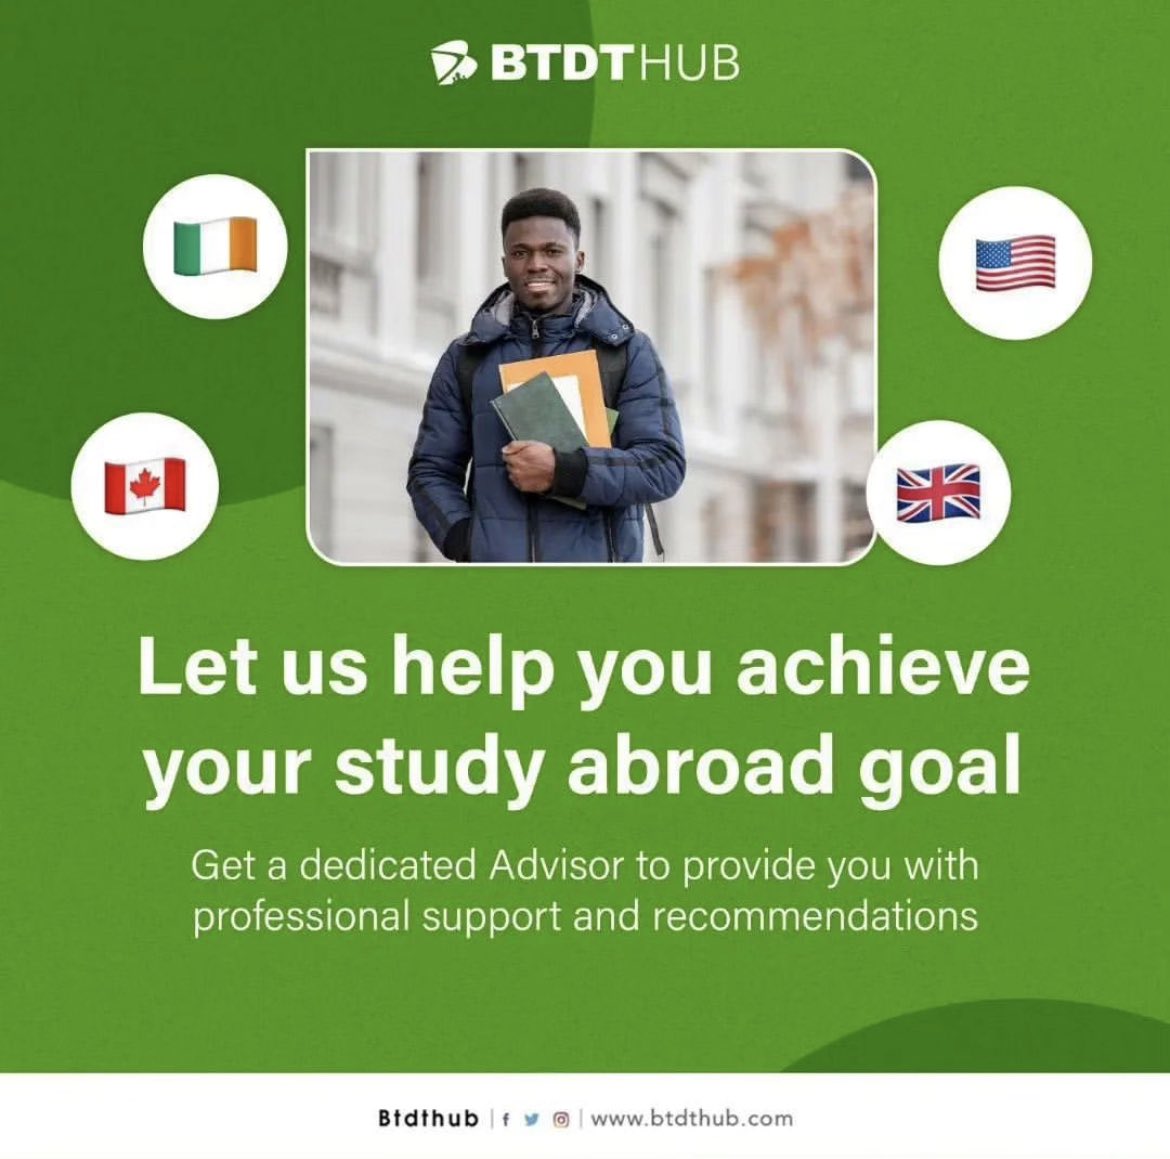 IELTS grades your English Language skills based on speaking, writing, reading and listening. Here are 5 tips to ace IELTS 👍. If you have plans to study abroad, our Advisors can guide you through the admission and visa application processes. For more information, send an…